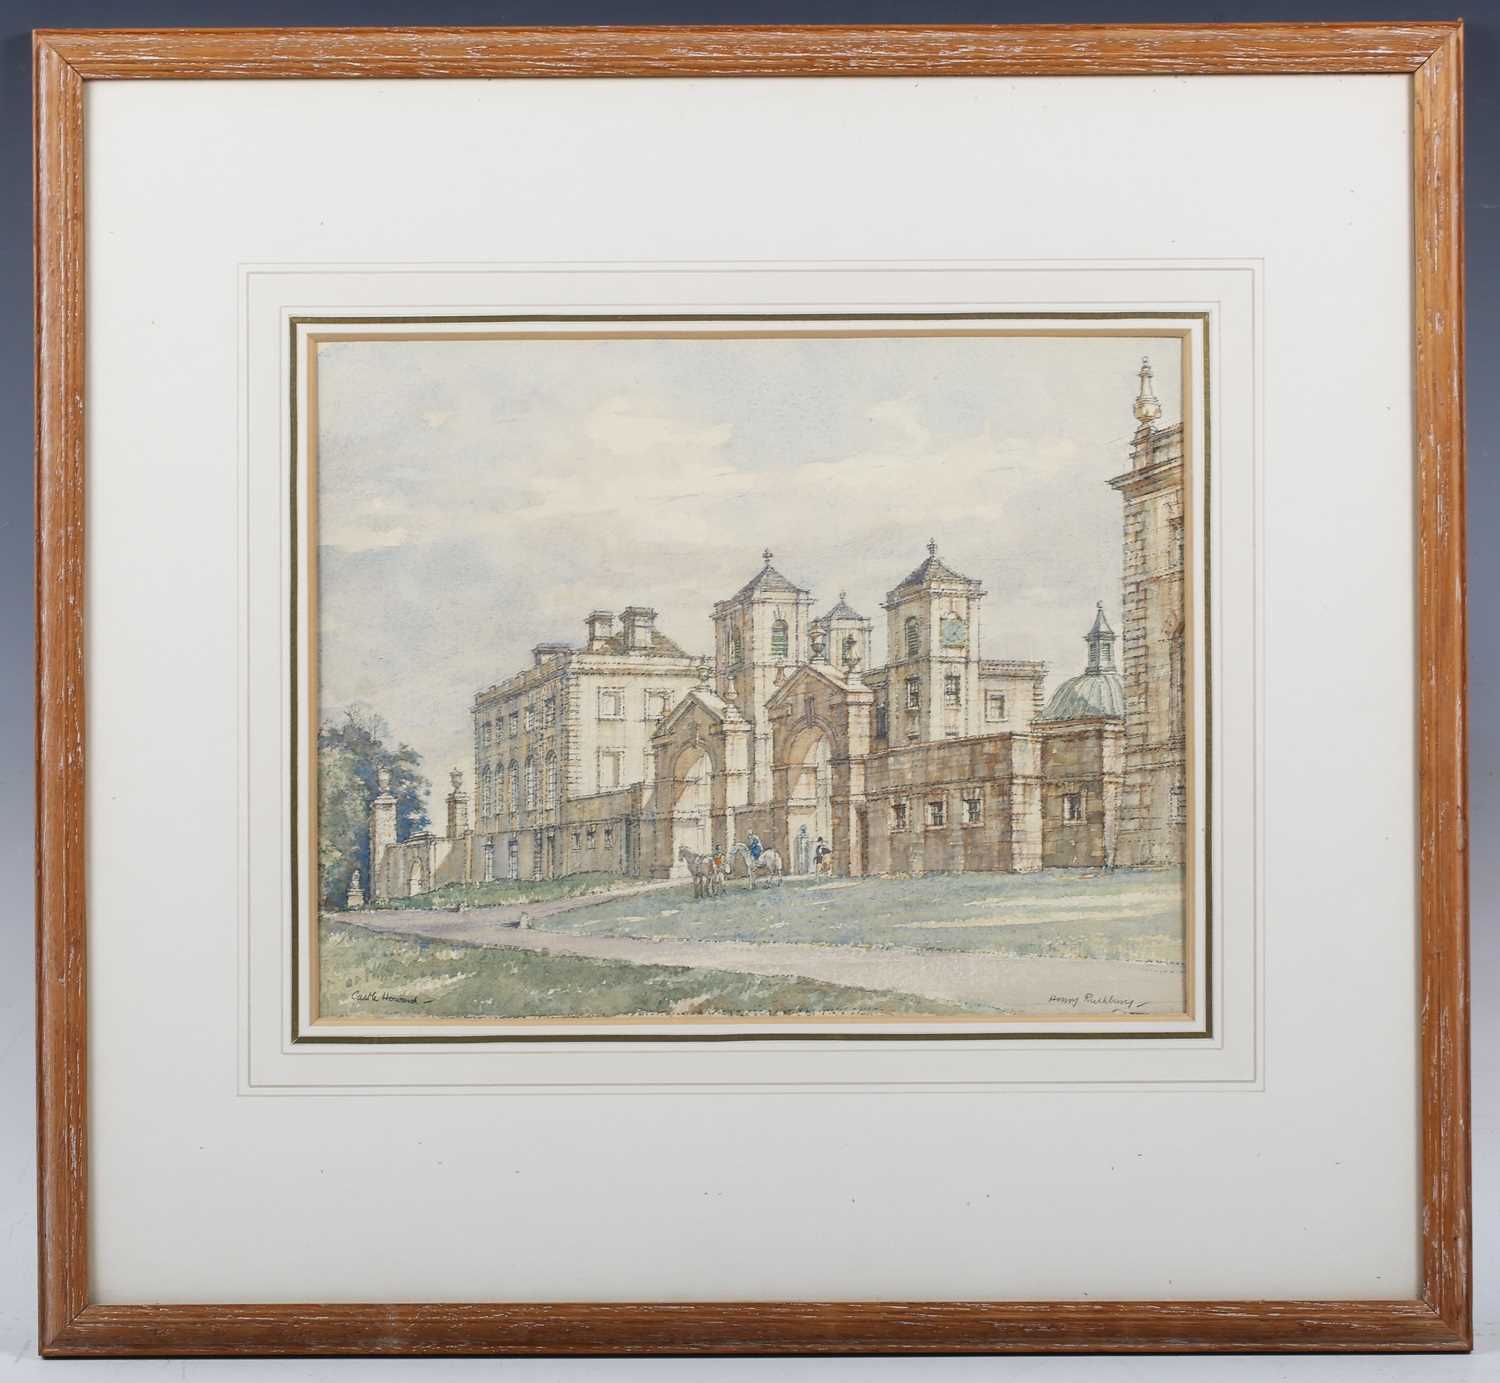 Henry George Rushbury – ‘Castle Howard’, early 20th century watercolour with ink, signed and titled, - Image 2 of 5